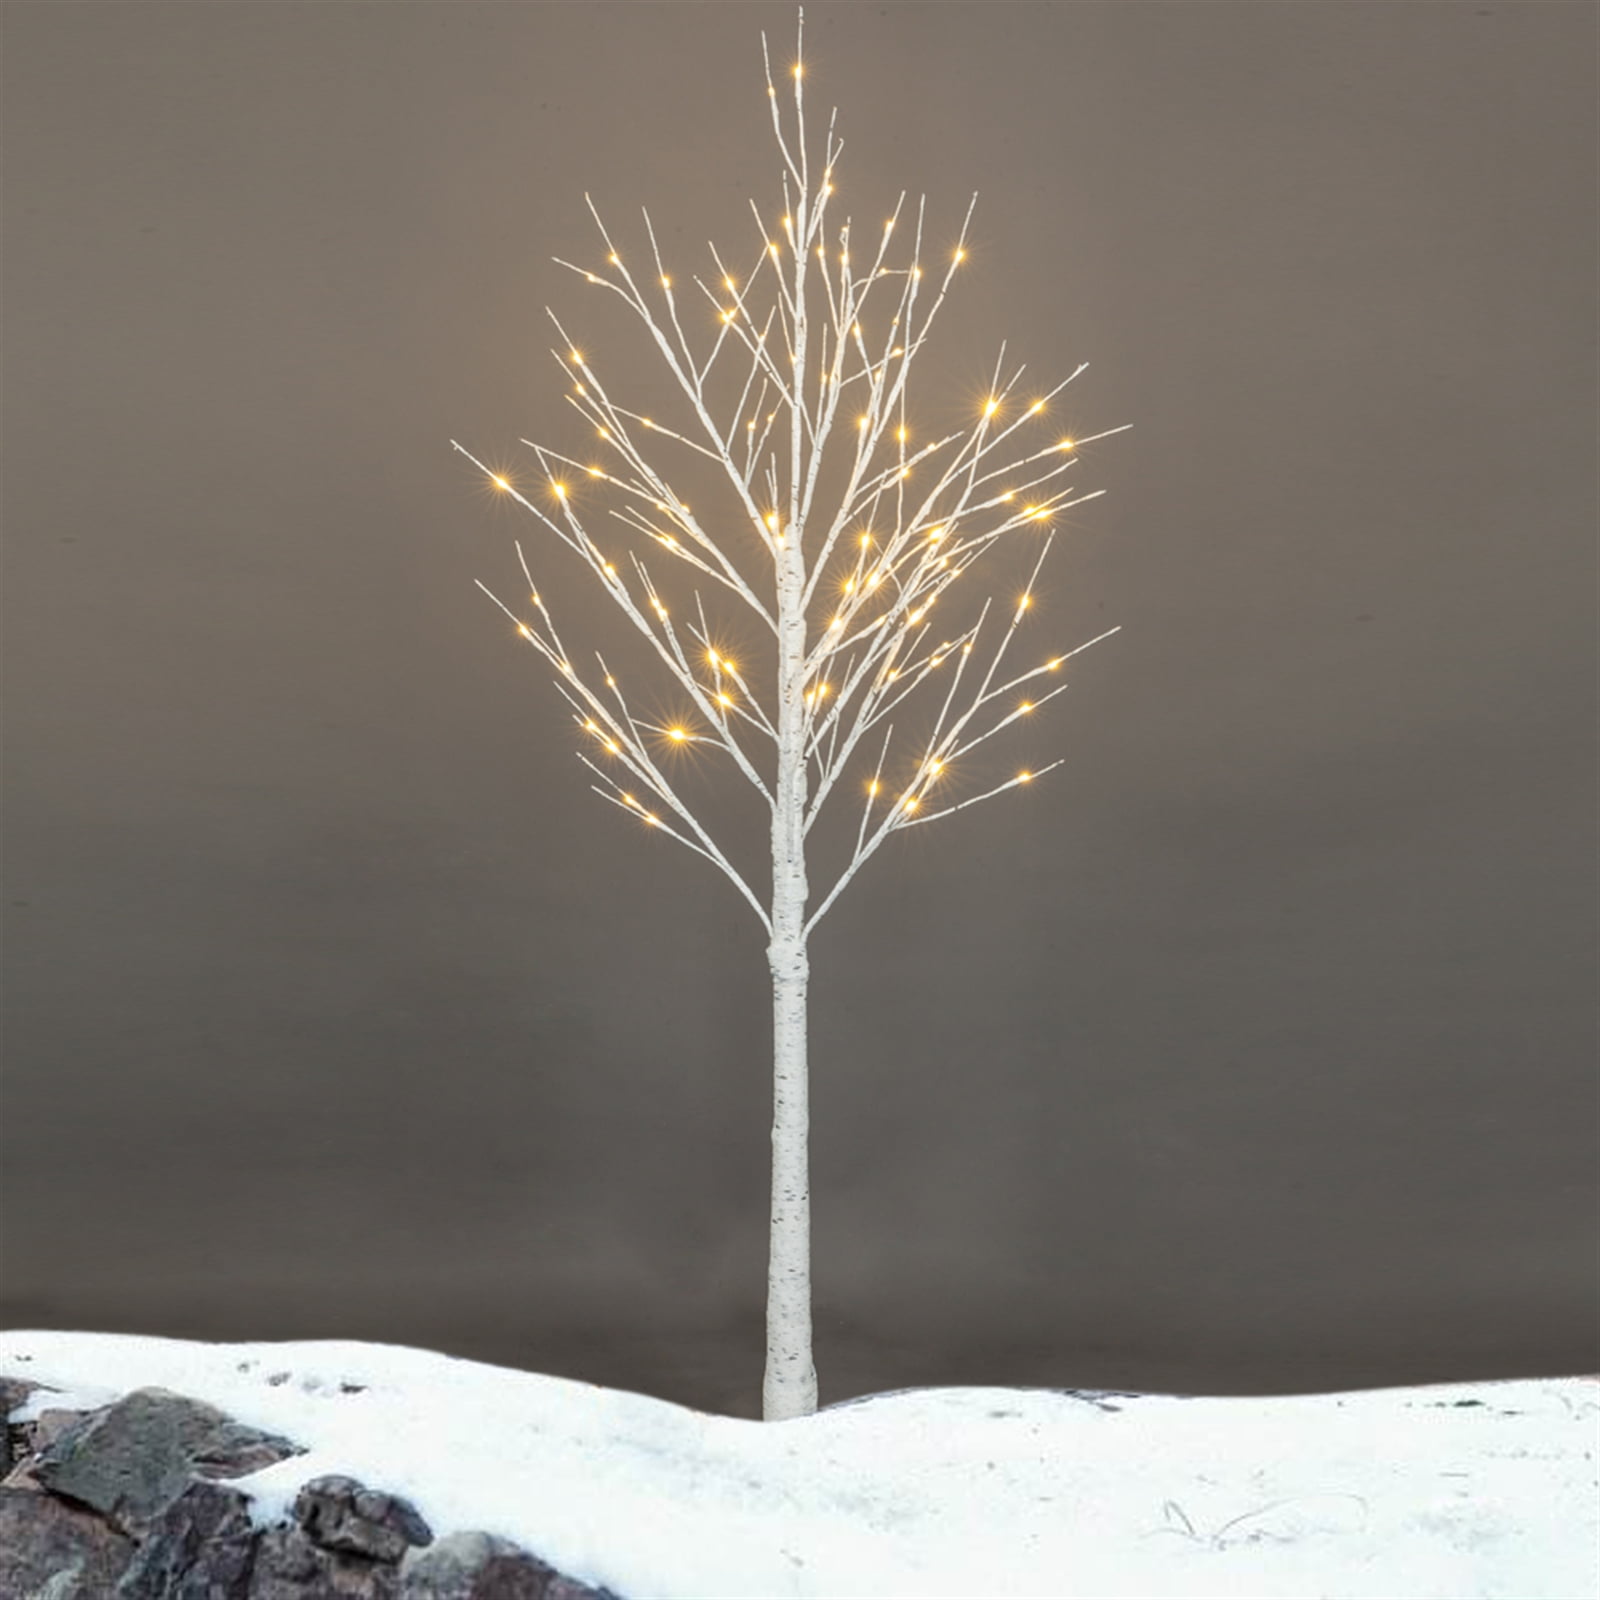 Details about   4FT Snowflake Christmas Tree with 48 LED Lamp & Stand Xmas Decoration Ornaments 